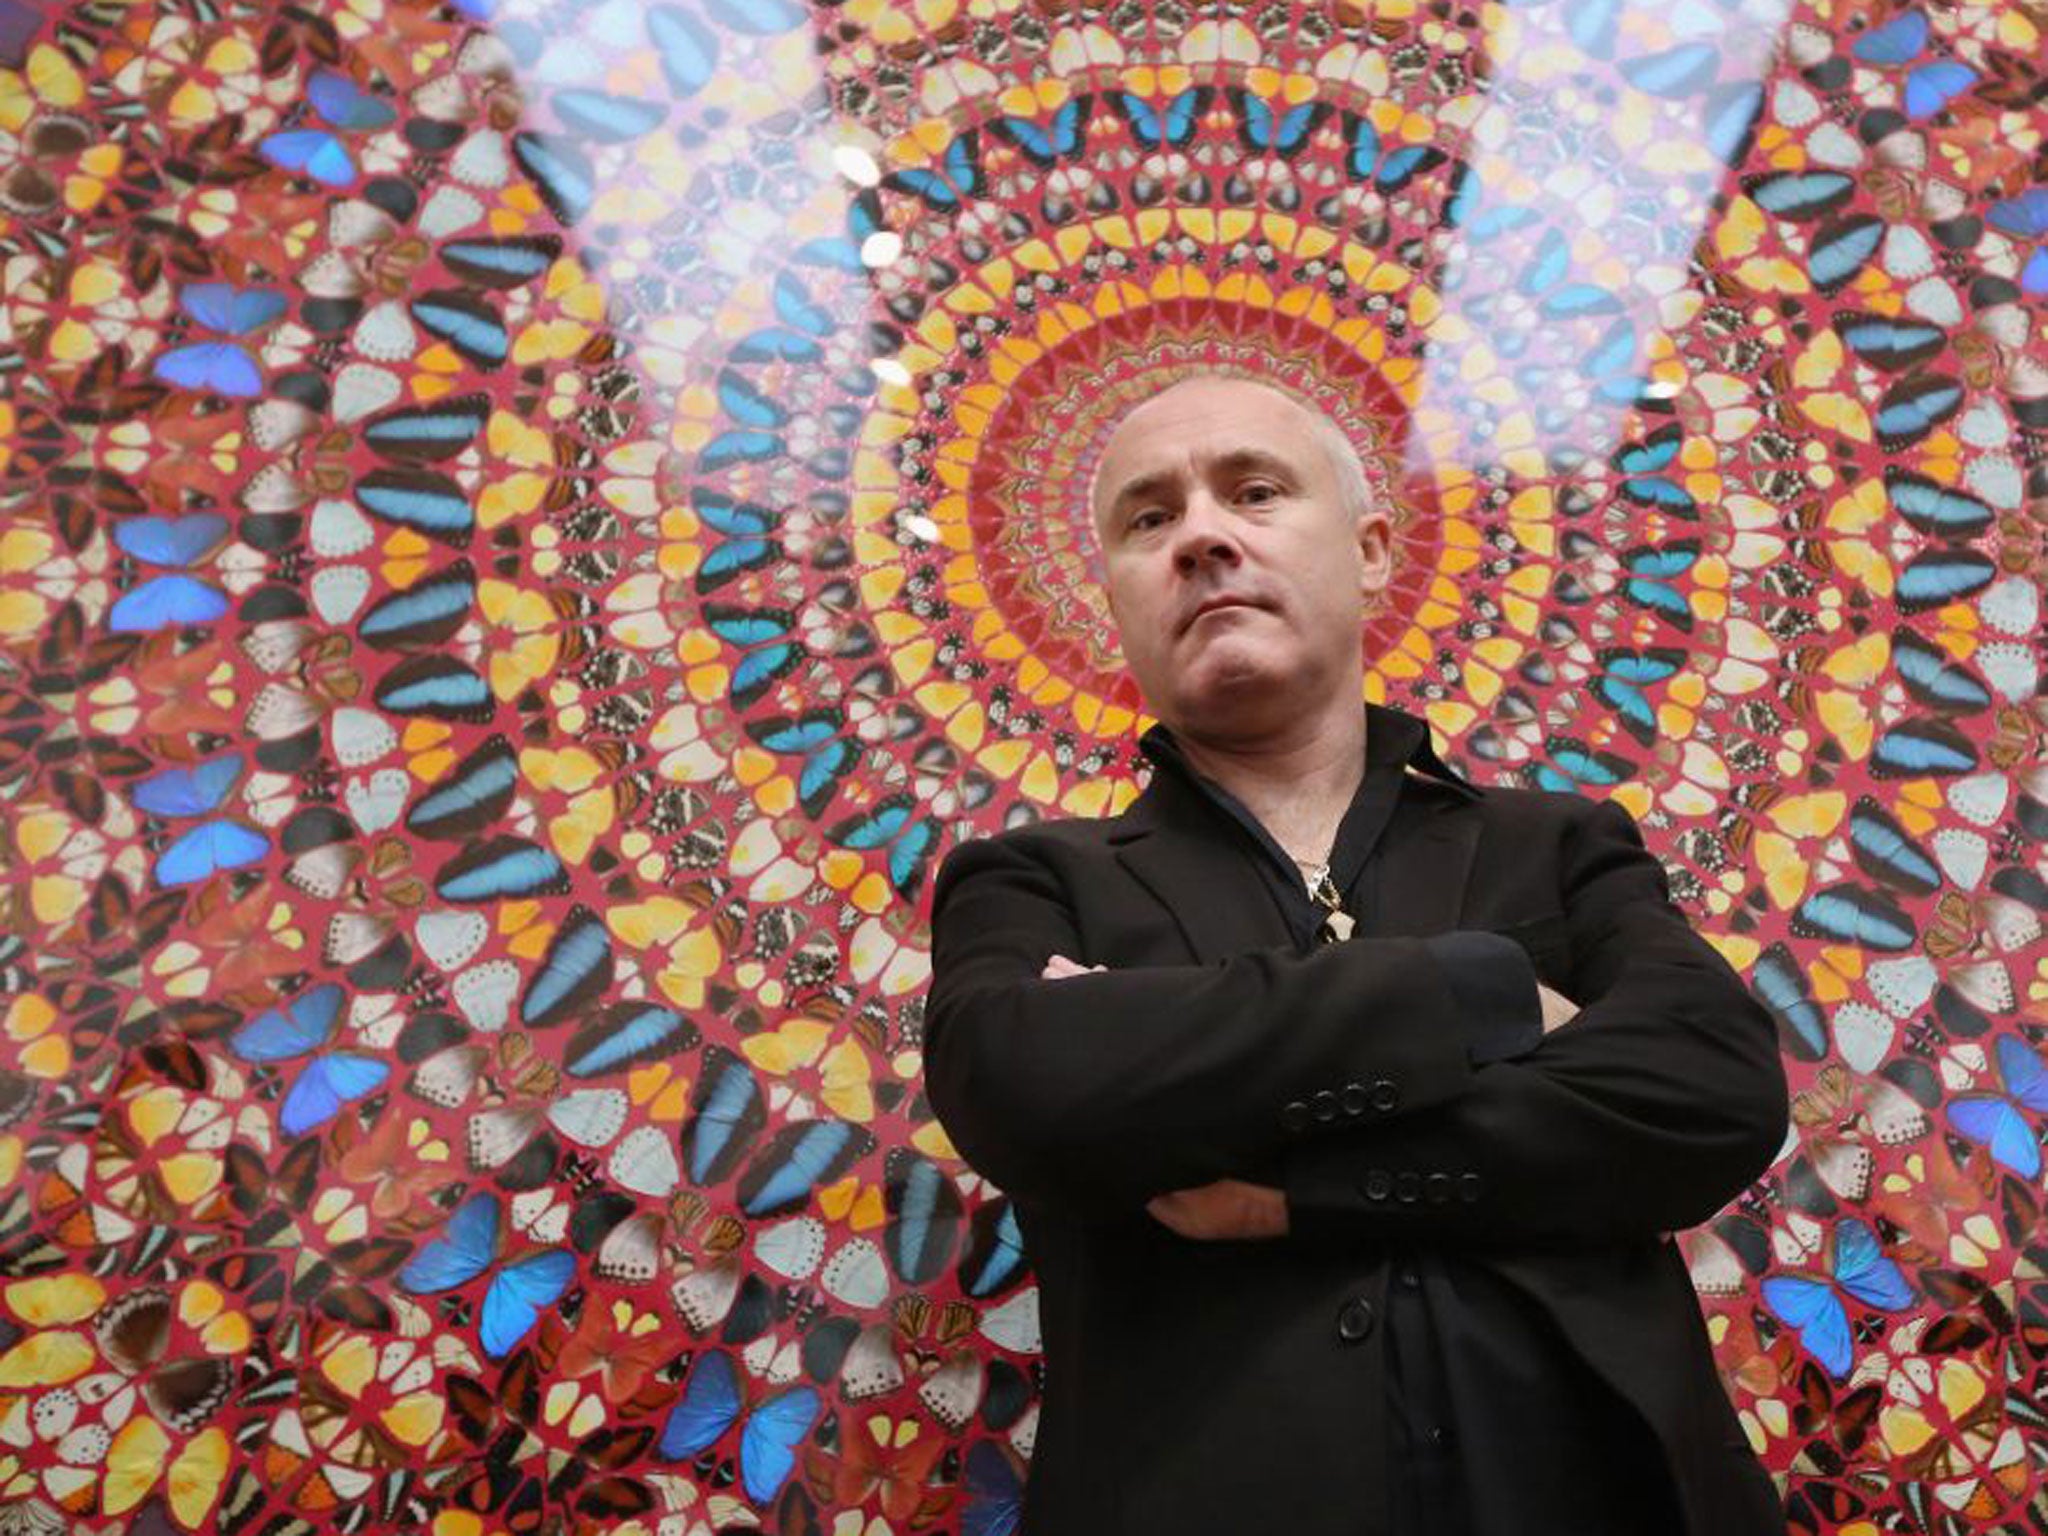 Artist Damien Hirst poses in front of his artwork entitled 'I am Become Death, Shatterer of Worlds' in the Tate Modern art gallery